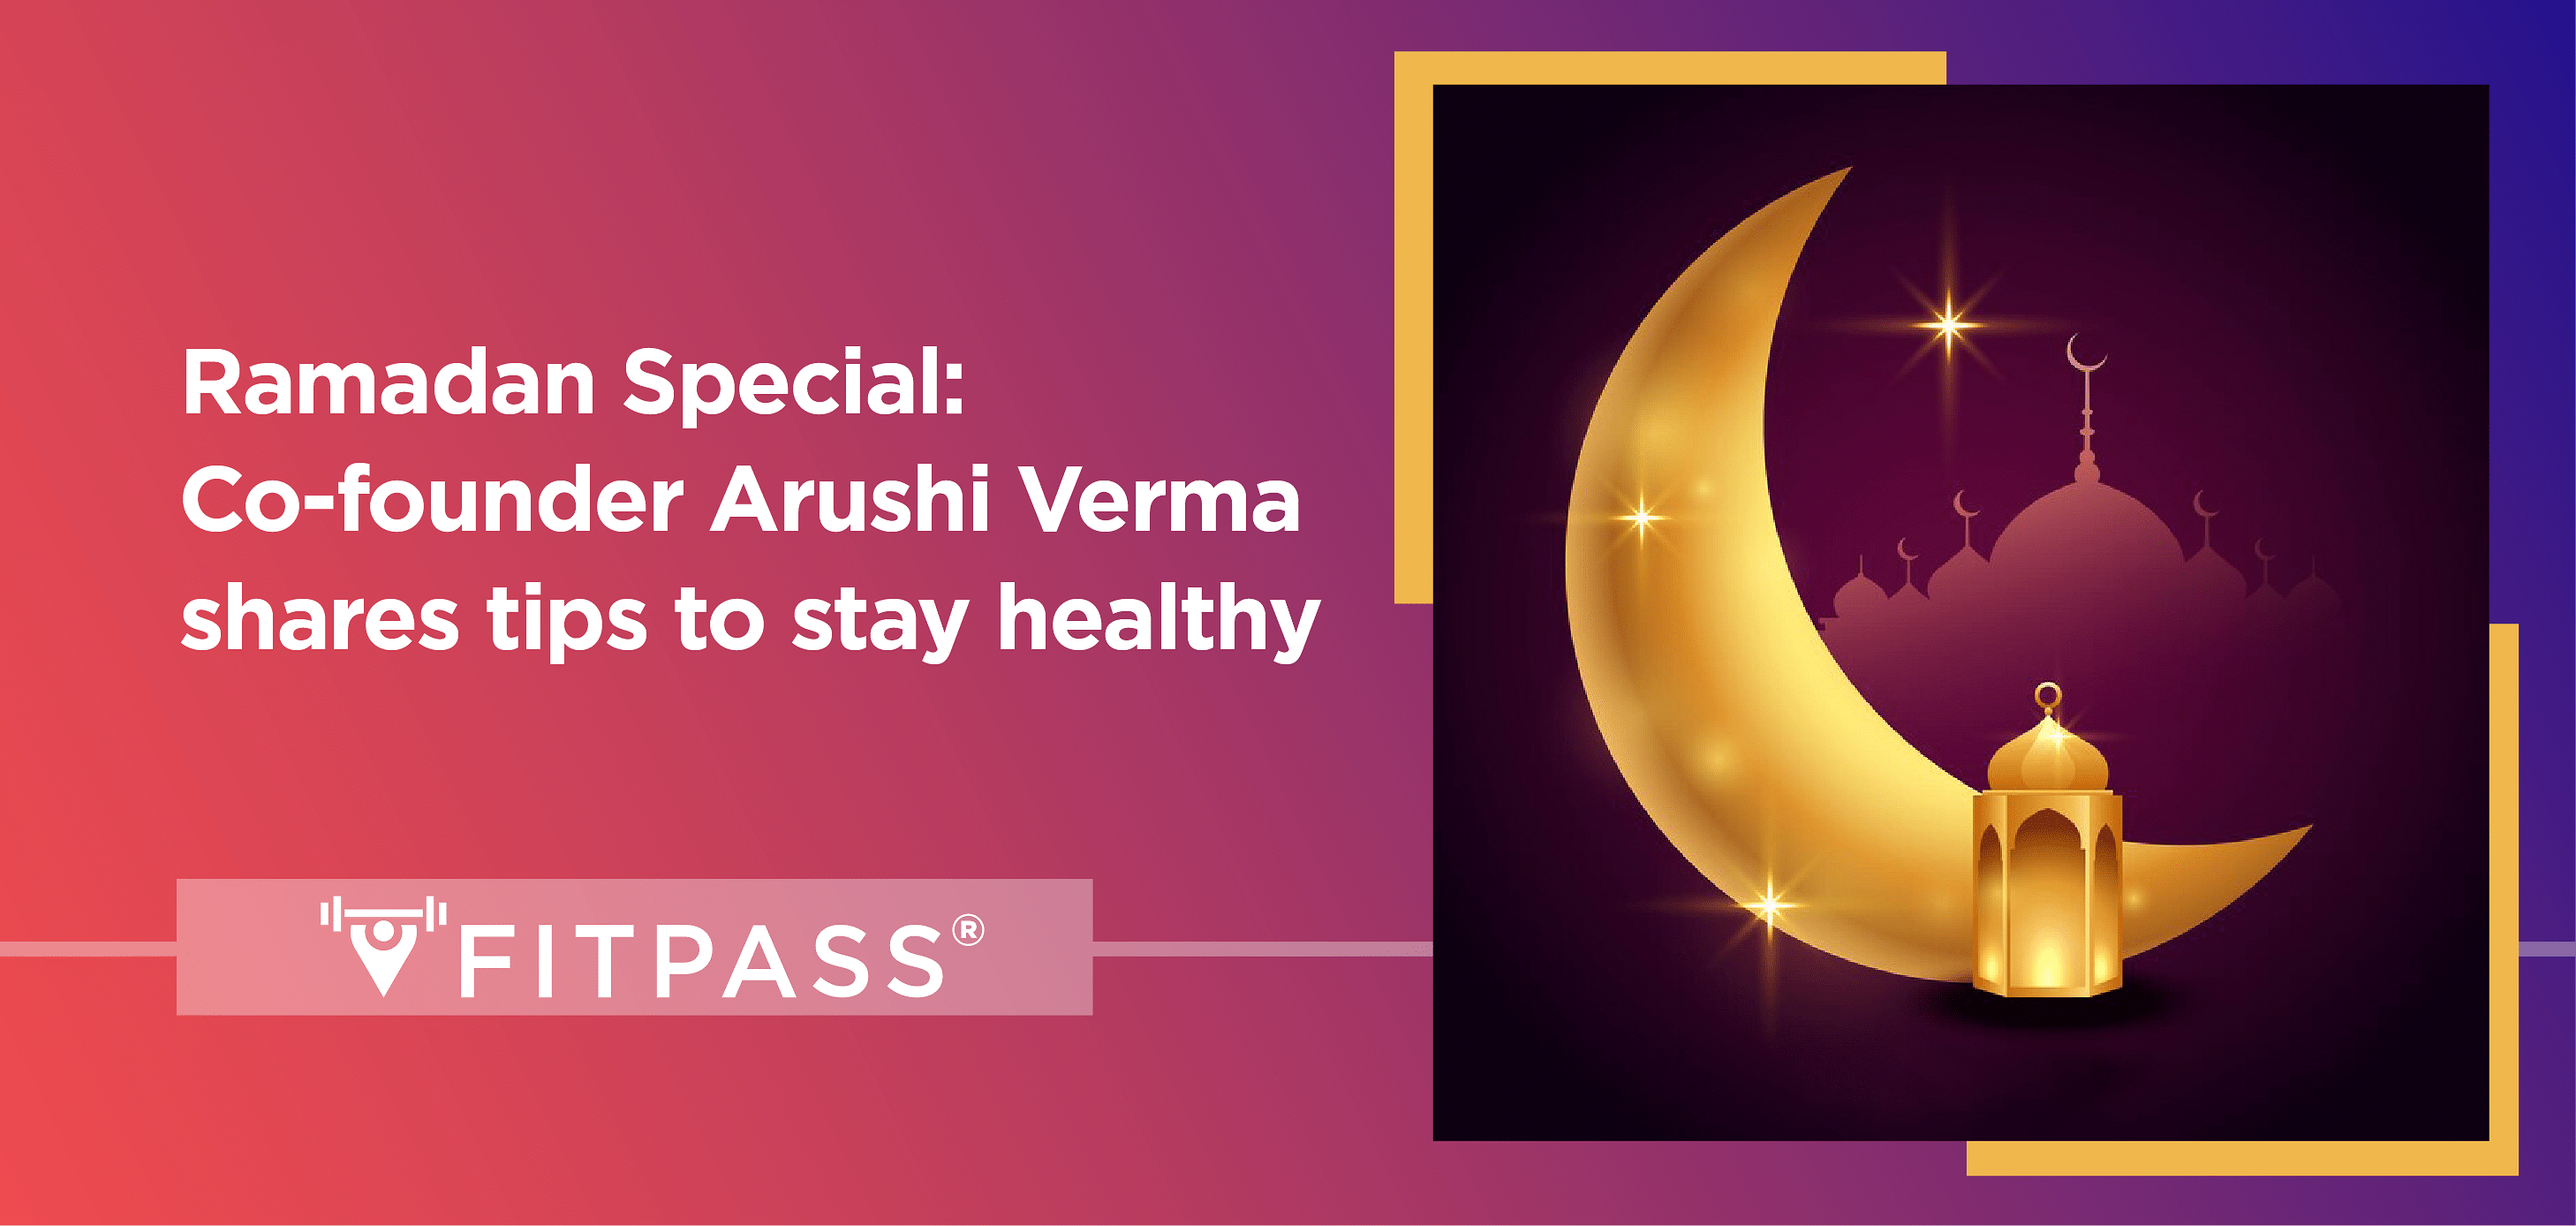 Ramadan Special: Co-founder Arushi Verma shares tips to stay healthy